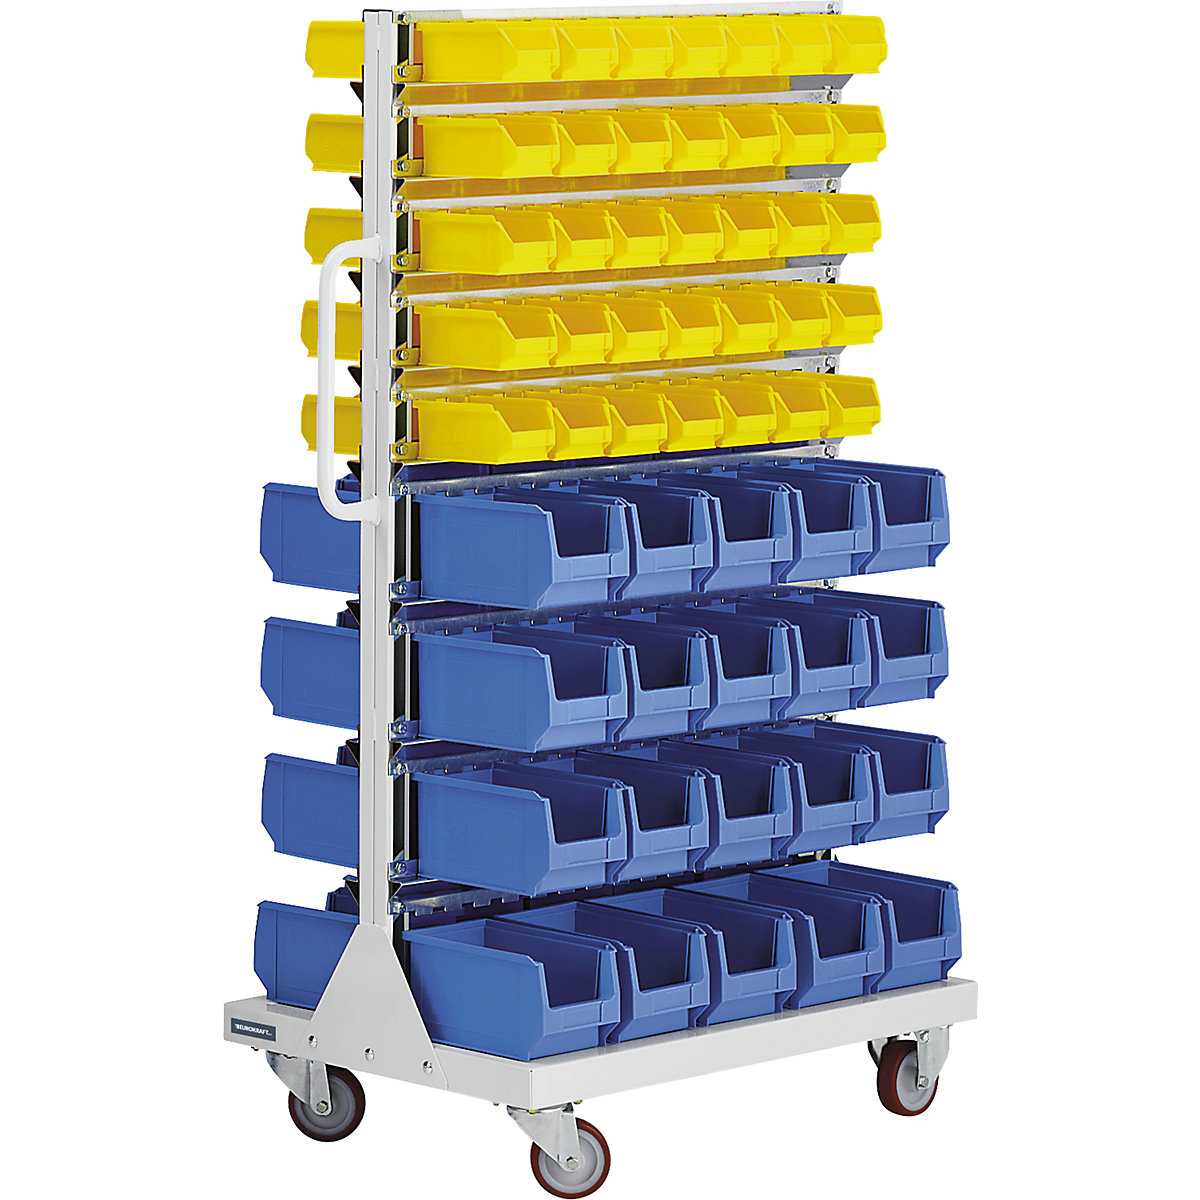 Mobile rack with open fronted storage bins – eurokraft pro, double sided, HxWxD 1450 x 855 x 540 mm, with 110 bins-3